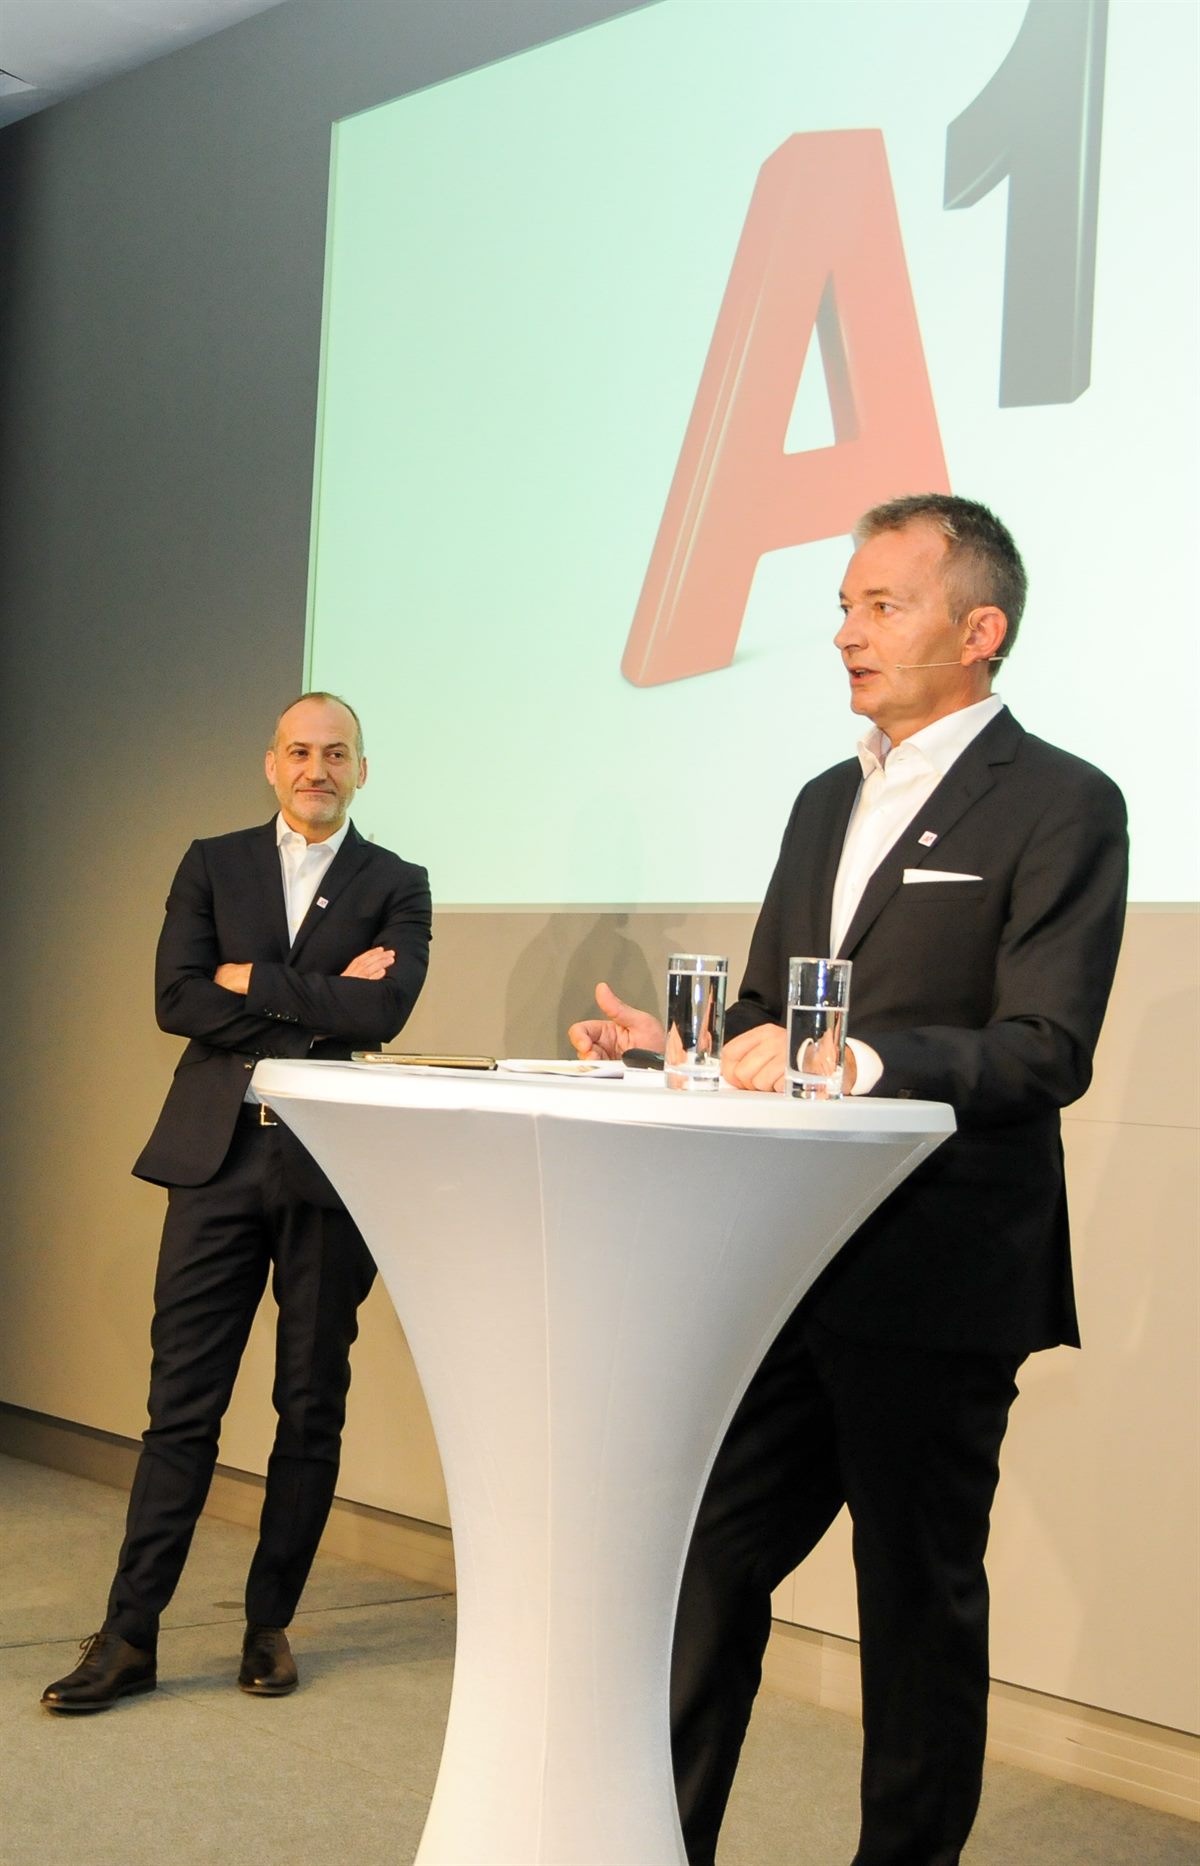 Established Austrian brand A1 becomes more international and strengthens its position on the European market